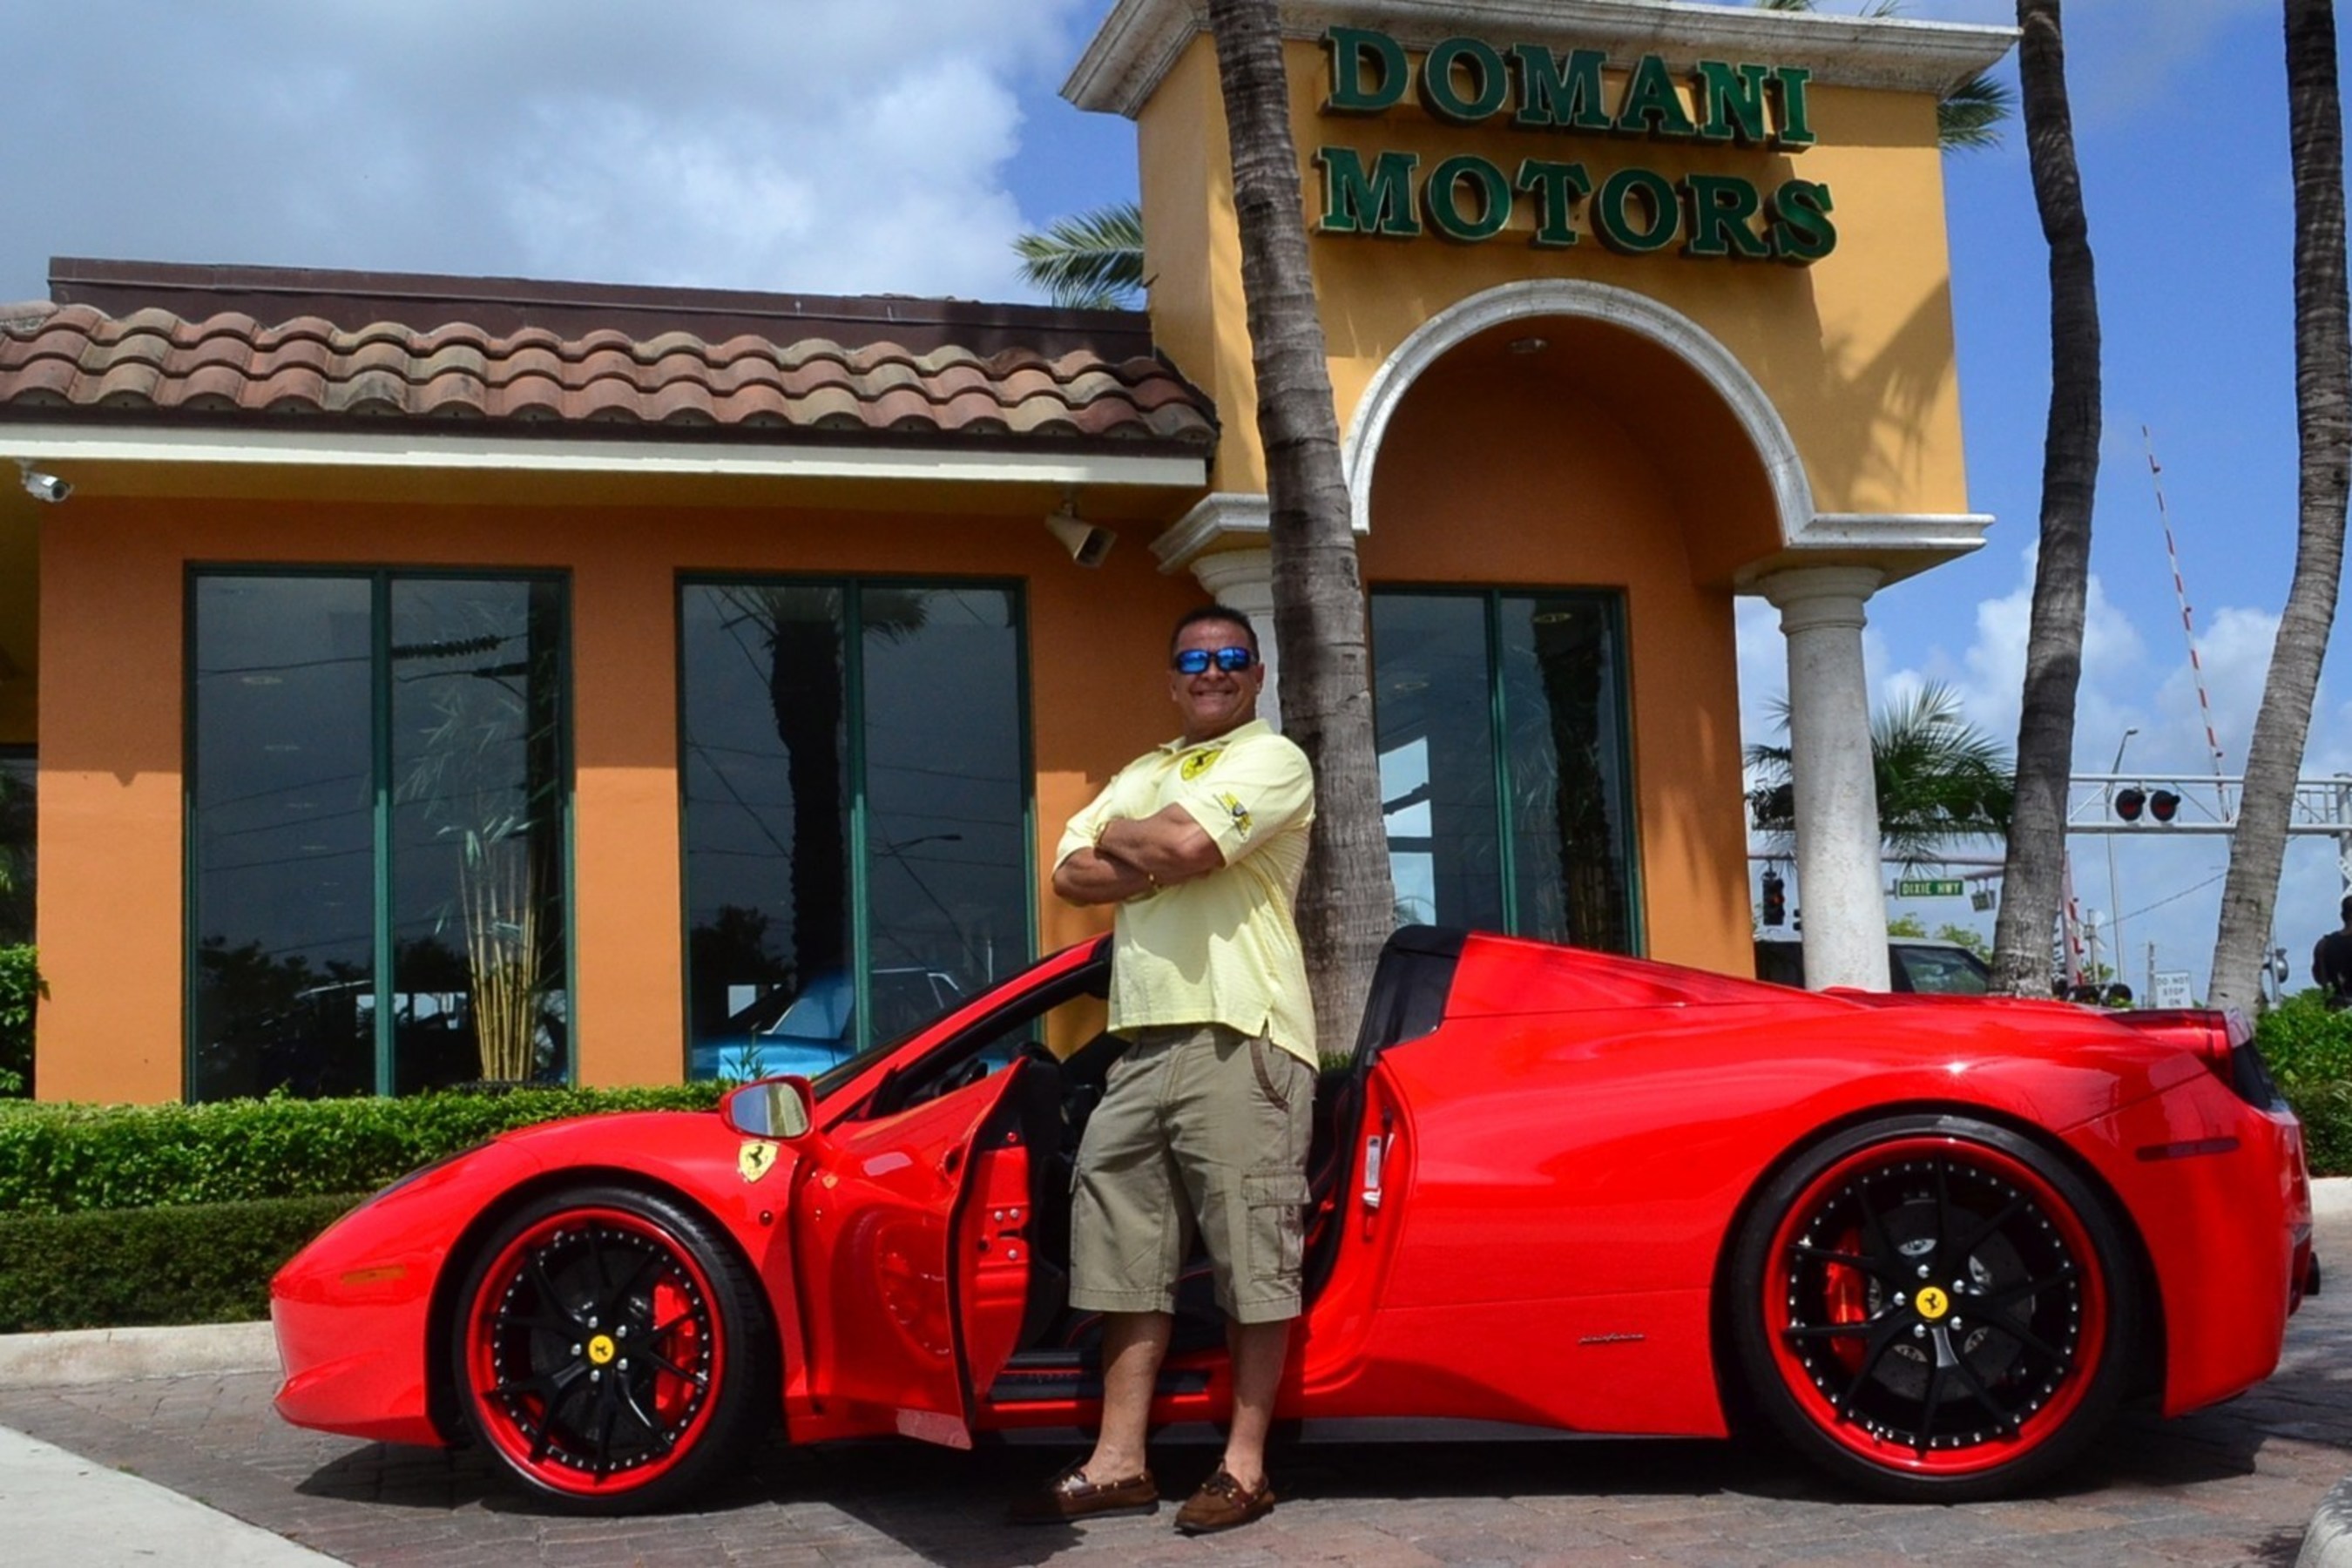 Michael Ghanem, CEO of Domani Motor Cars, and his associates offer one-stop buying and selling of pre-owned exotic, performance, luxury, and specialty automobiles.